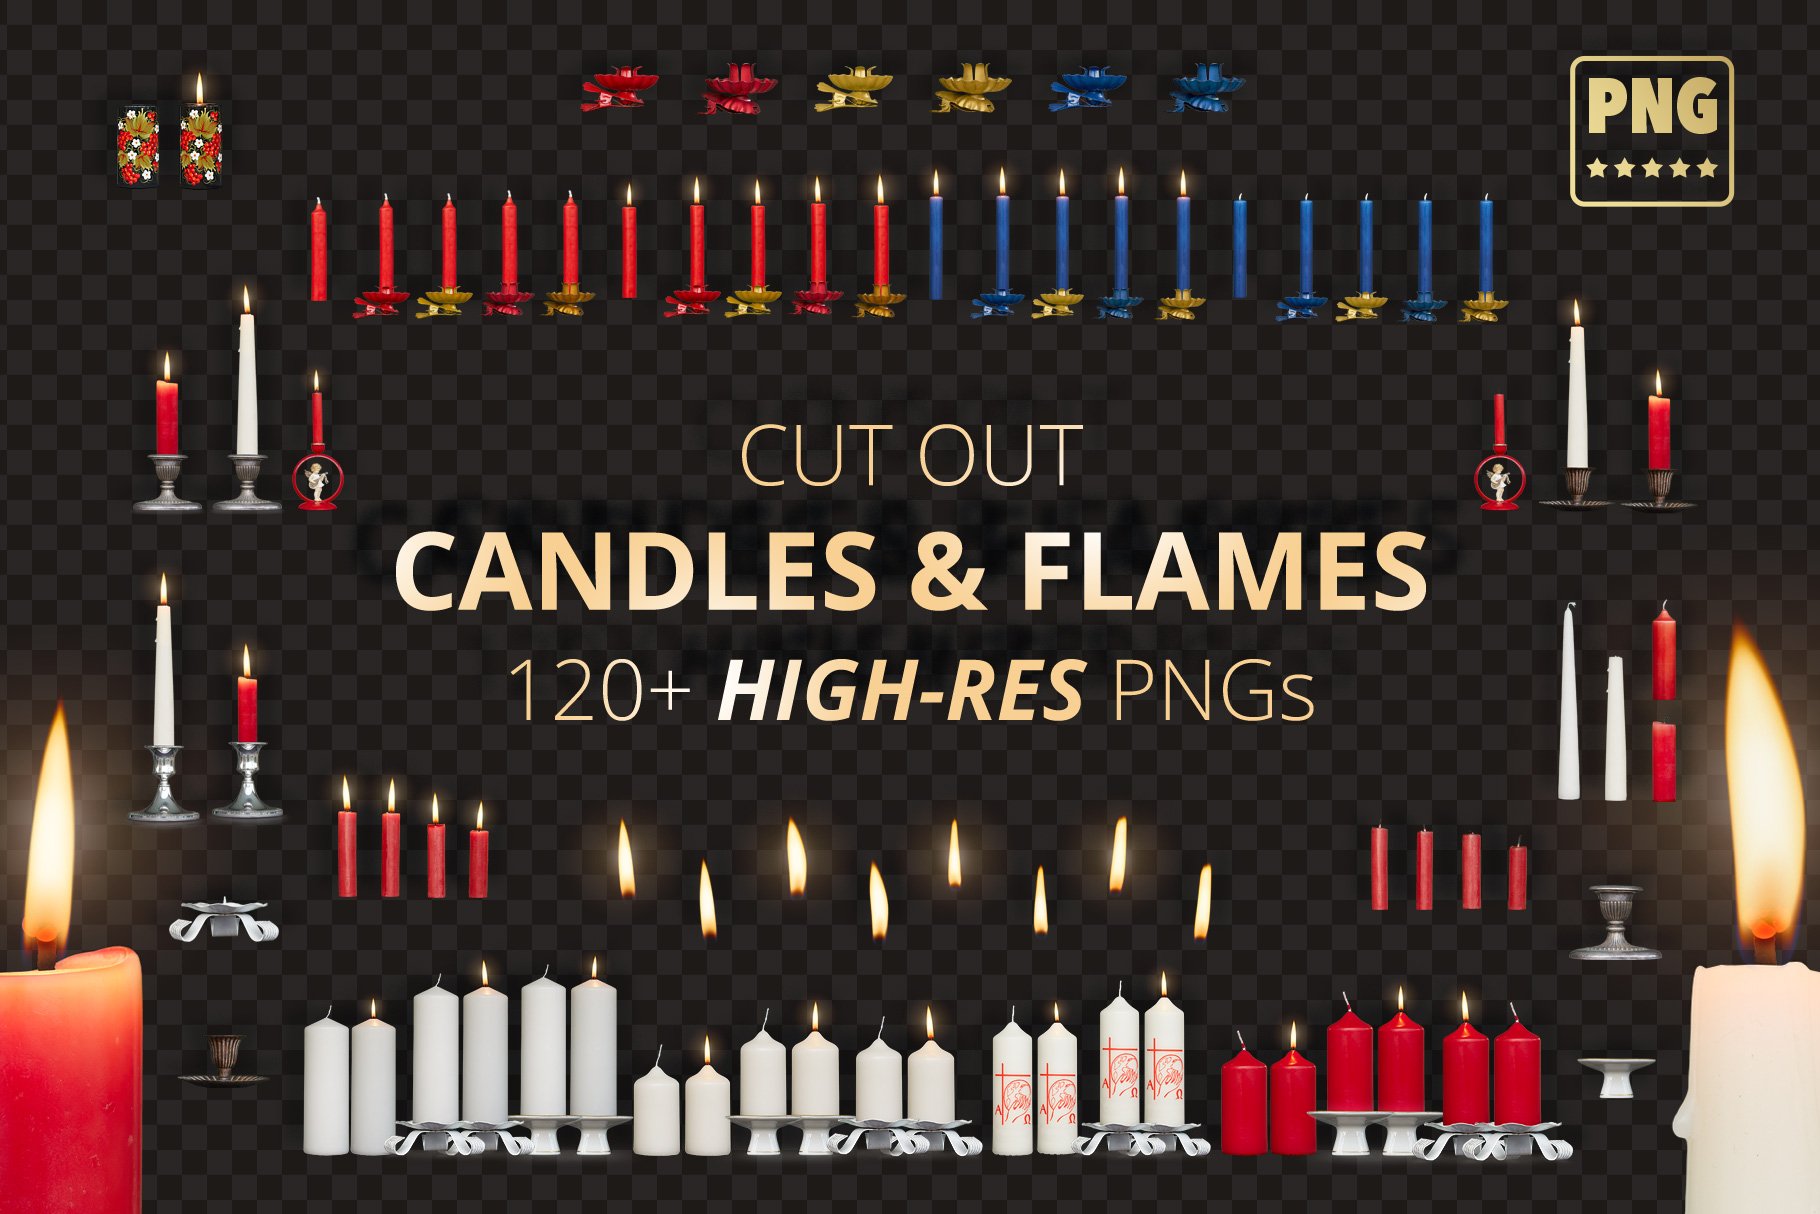 Candles & Flames Bundle - PNGs cover image.